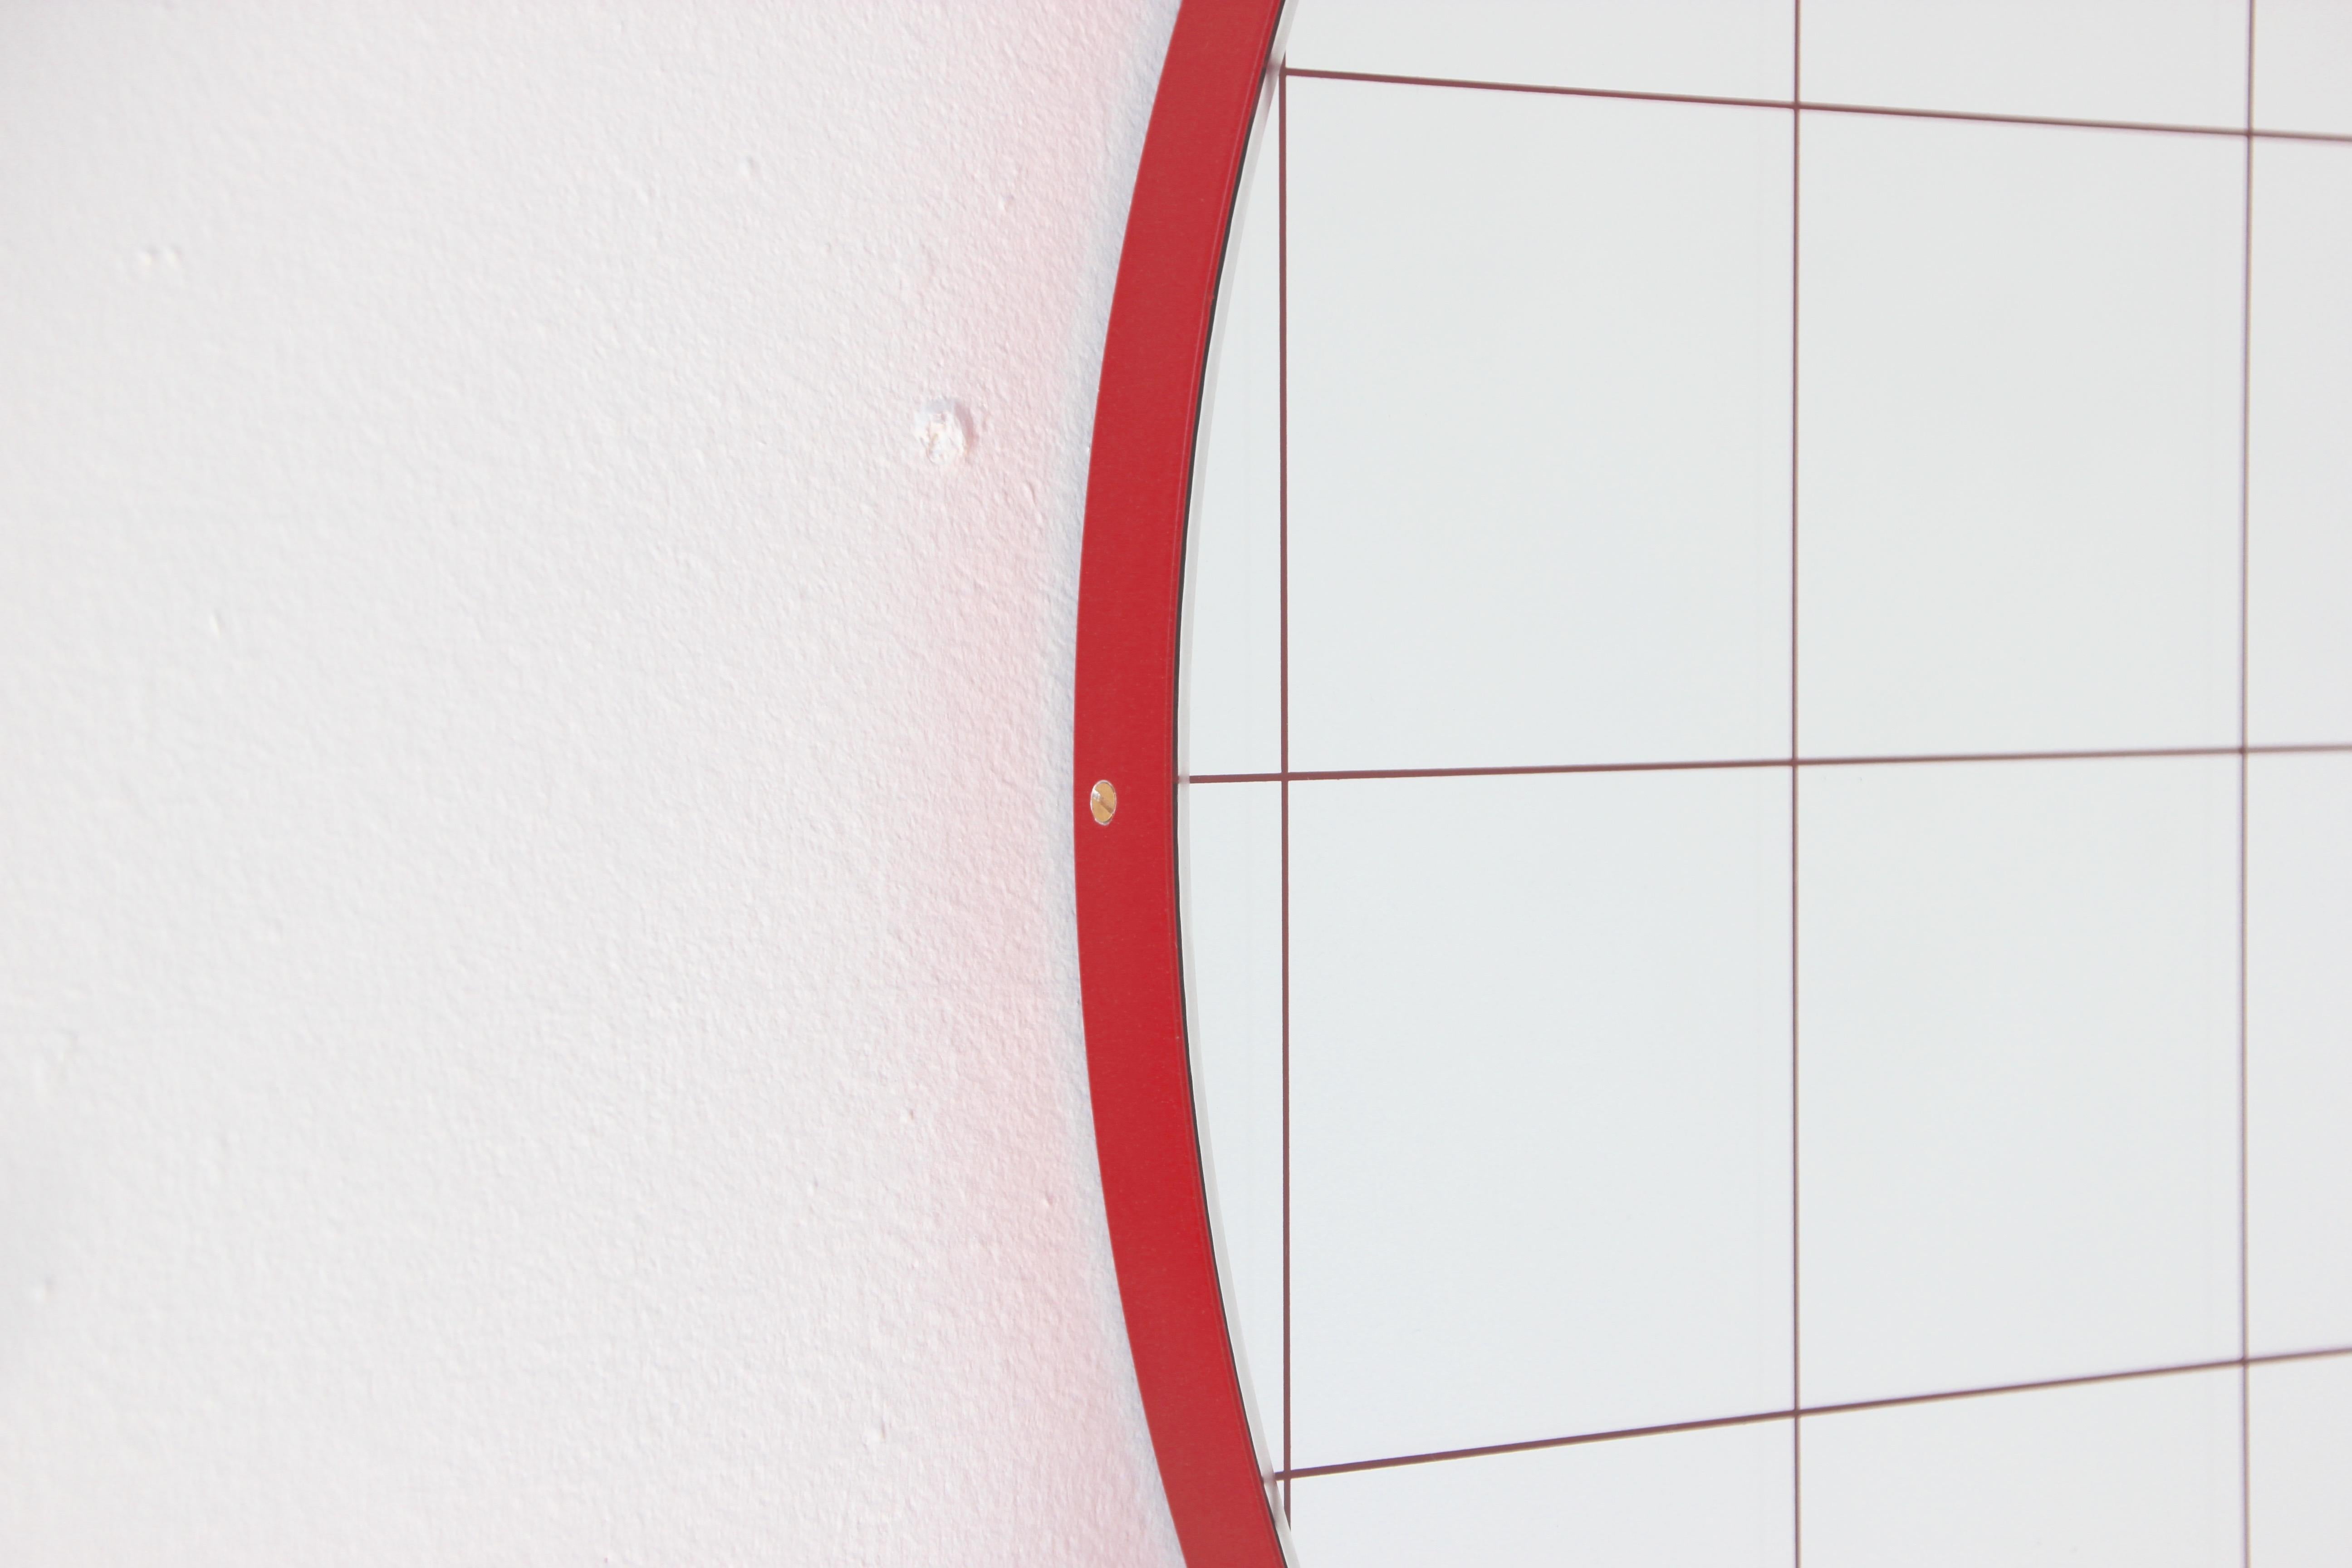 Orbis Red Grid Round Contemporary Mirror with Red Frame, Large 2